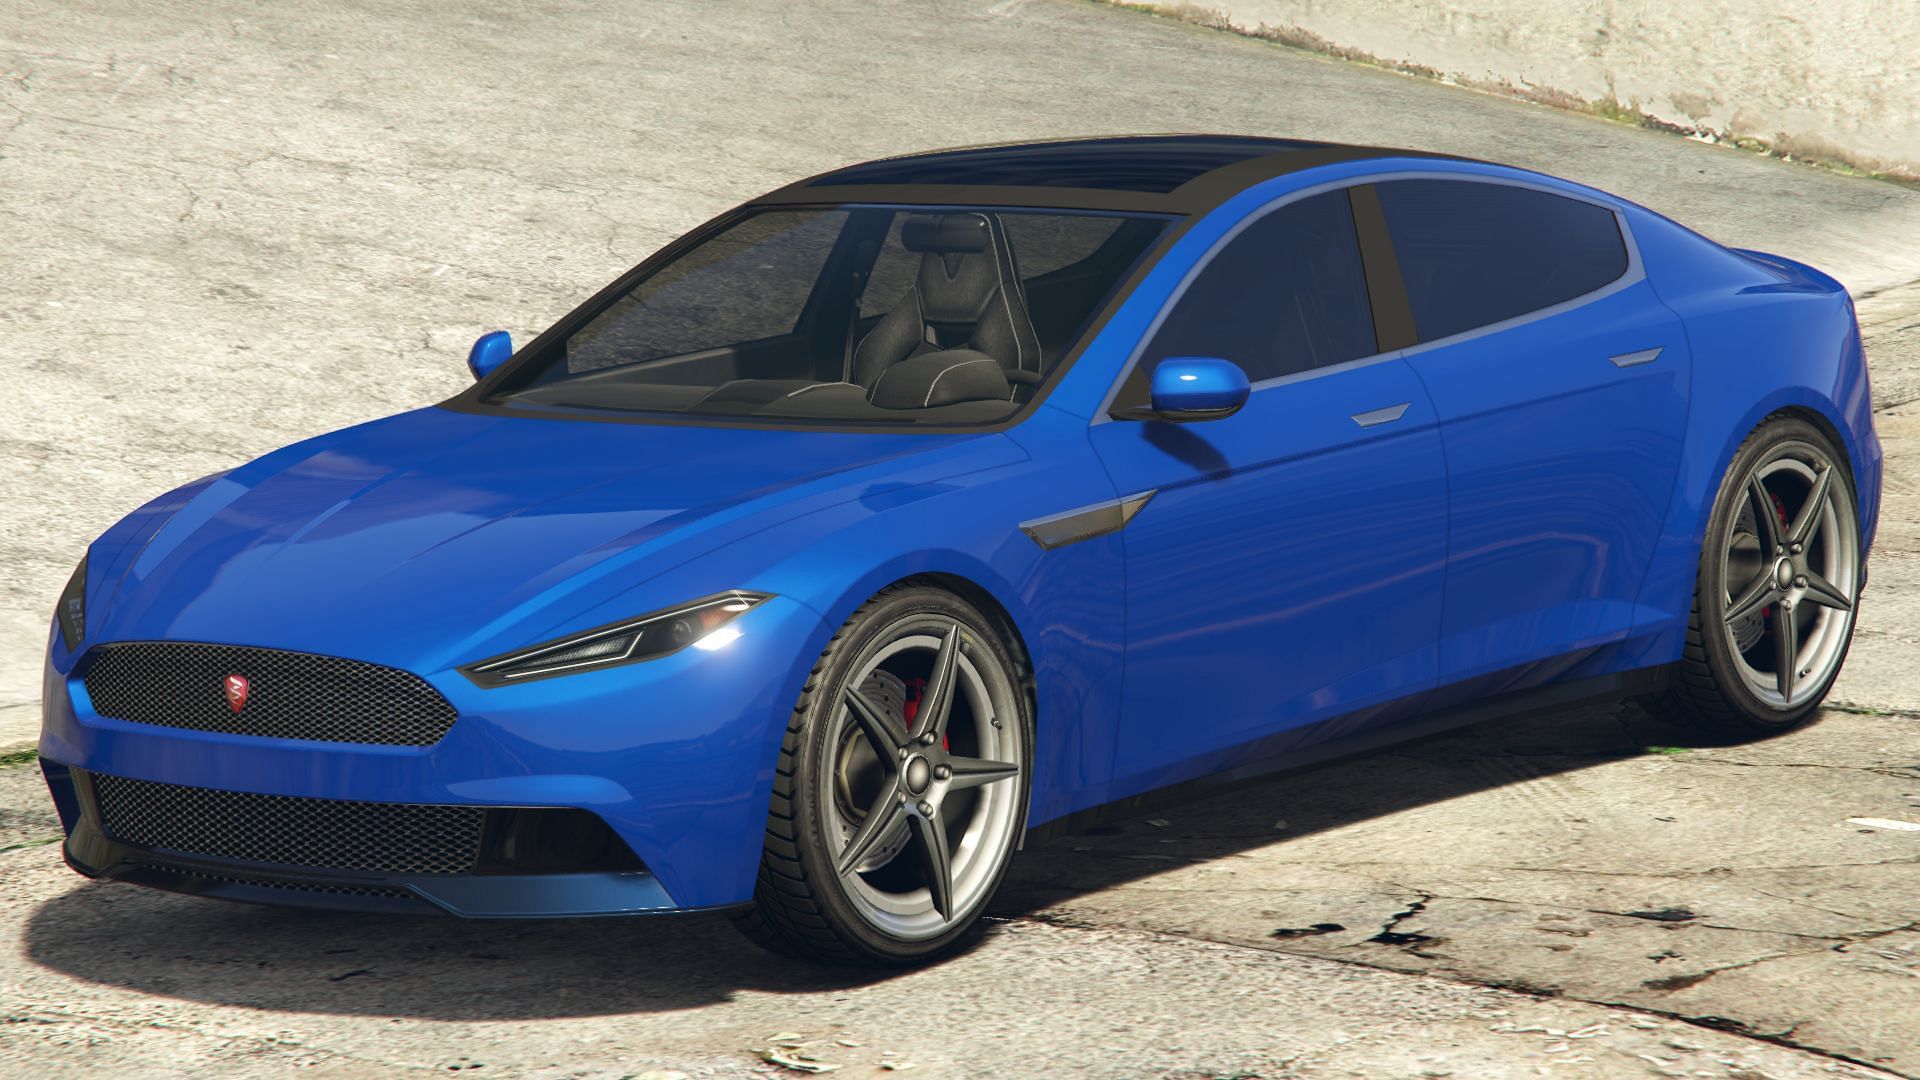 GTA Online s Podium Vehicle for this week the Coil Raiden